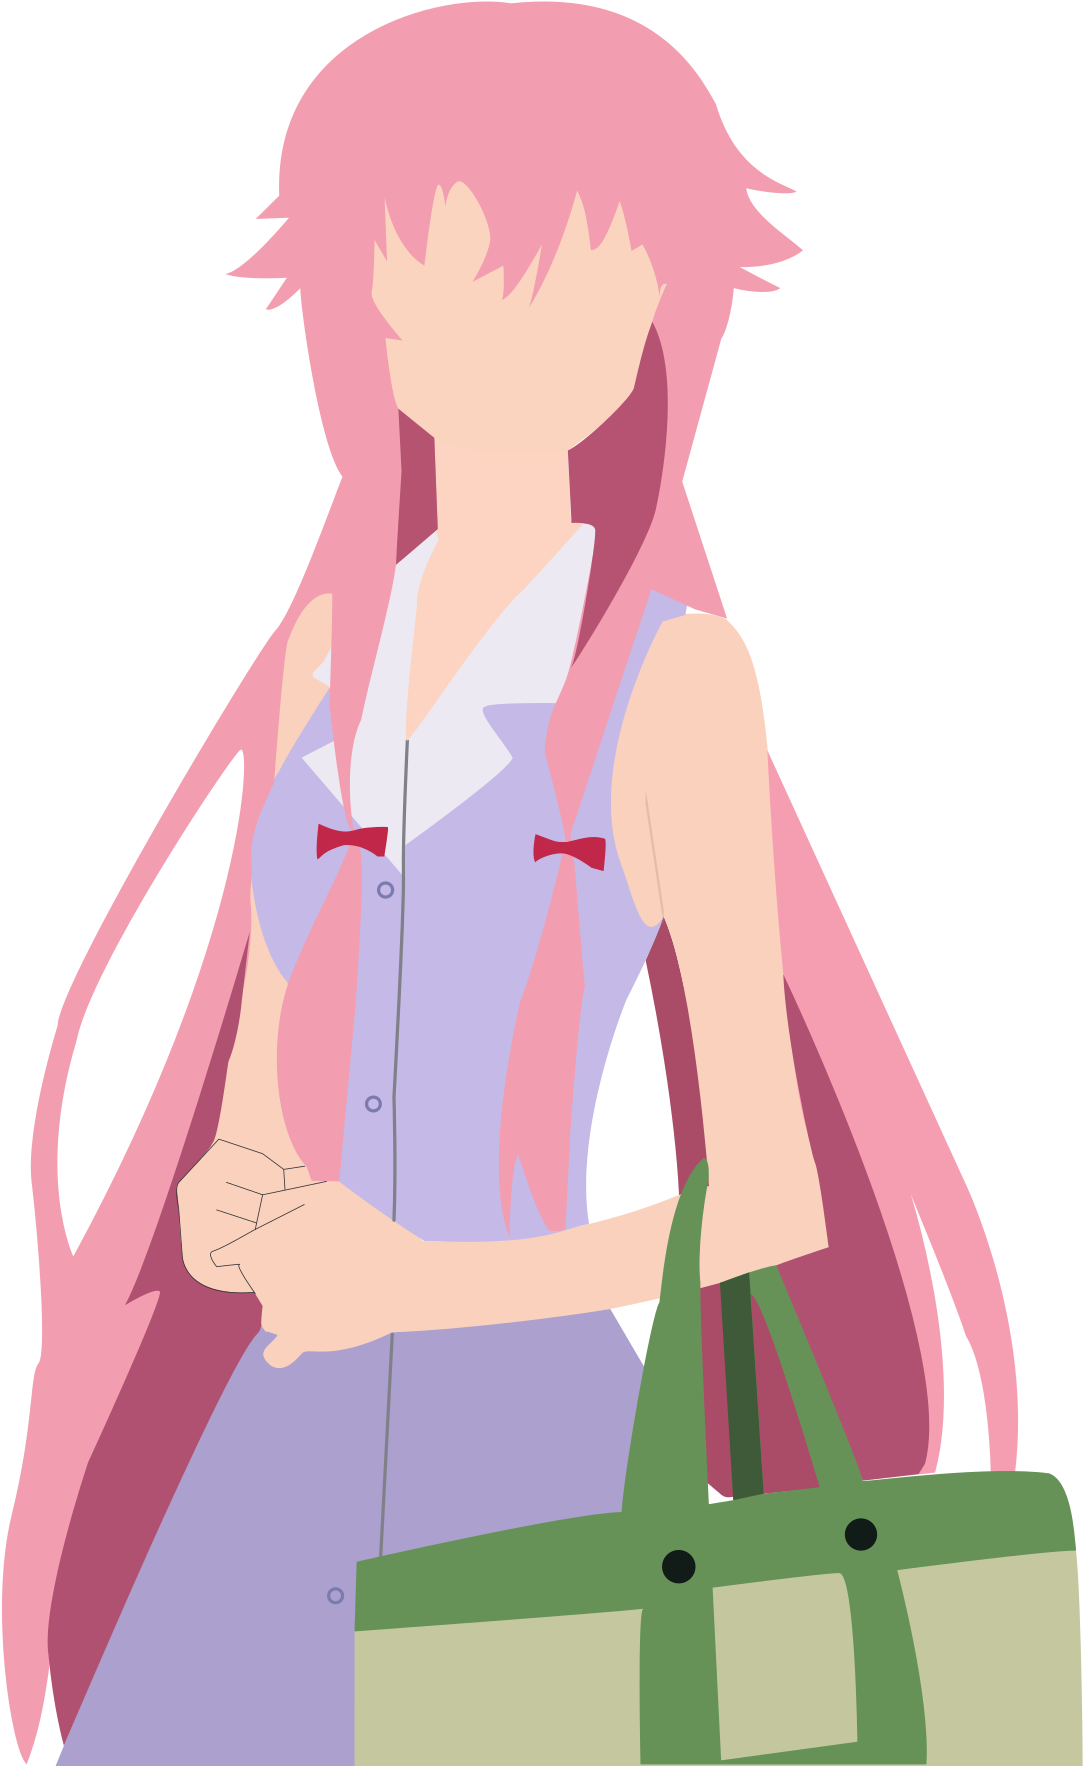 Pink Haired Anime Girl With Green Bag PNG